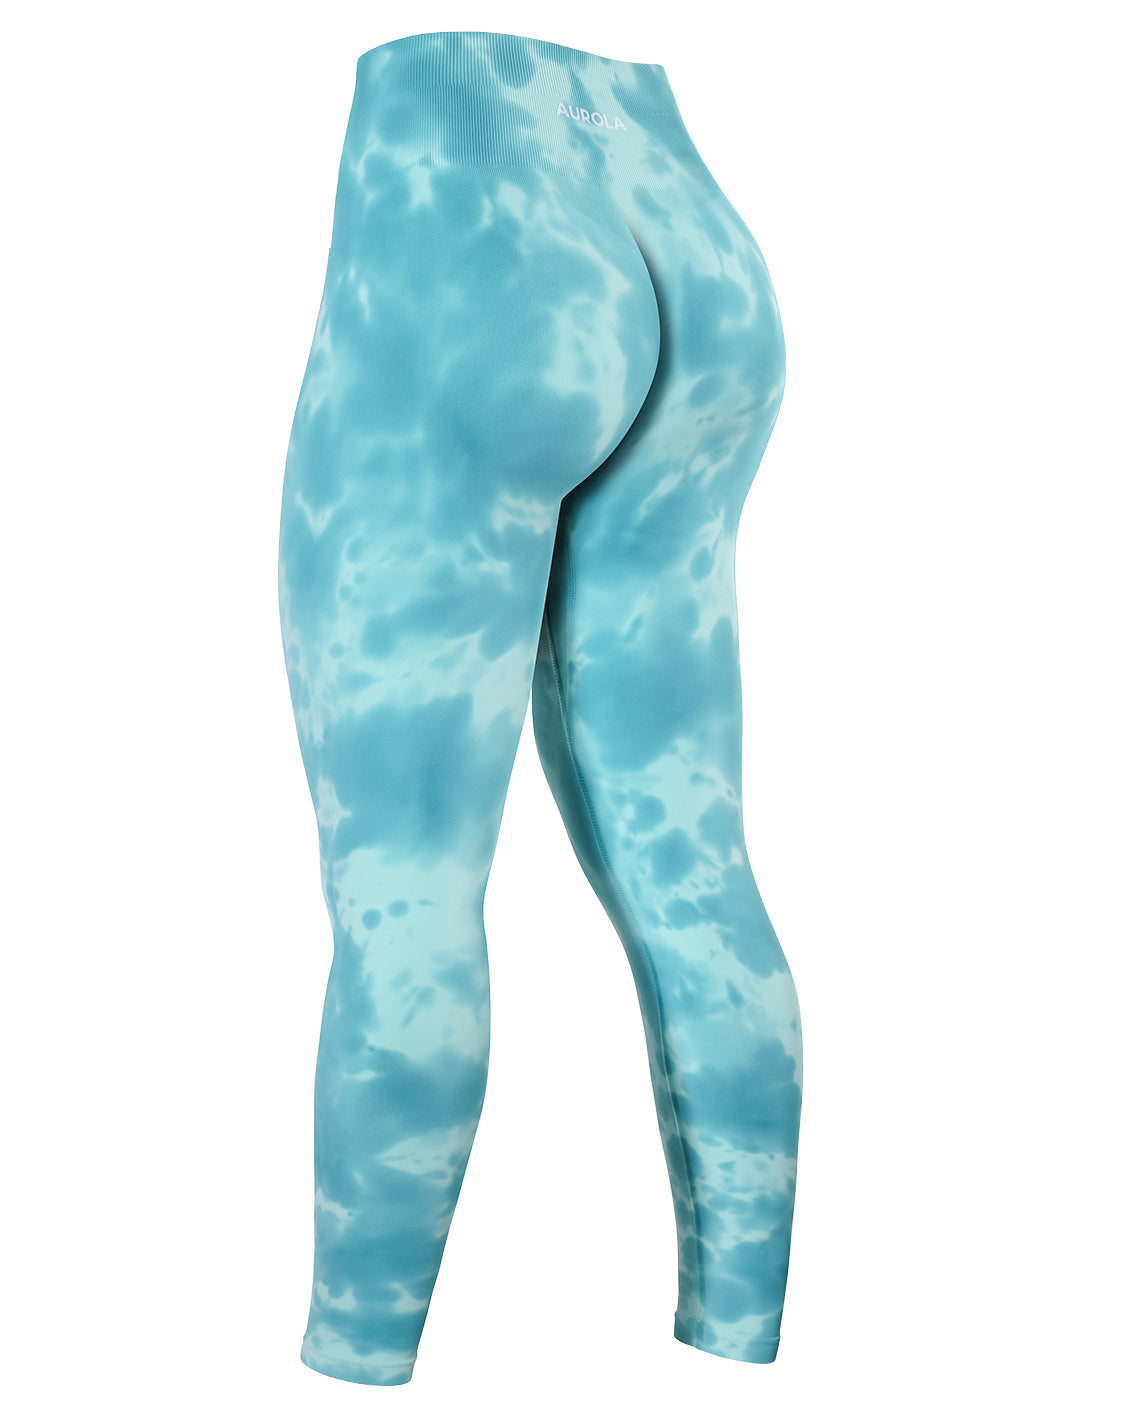  Dream Tie Dye Workout Leggings For Women Seamless High Waist  Scrunch Athletic Running Gym Fitness Active Pants